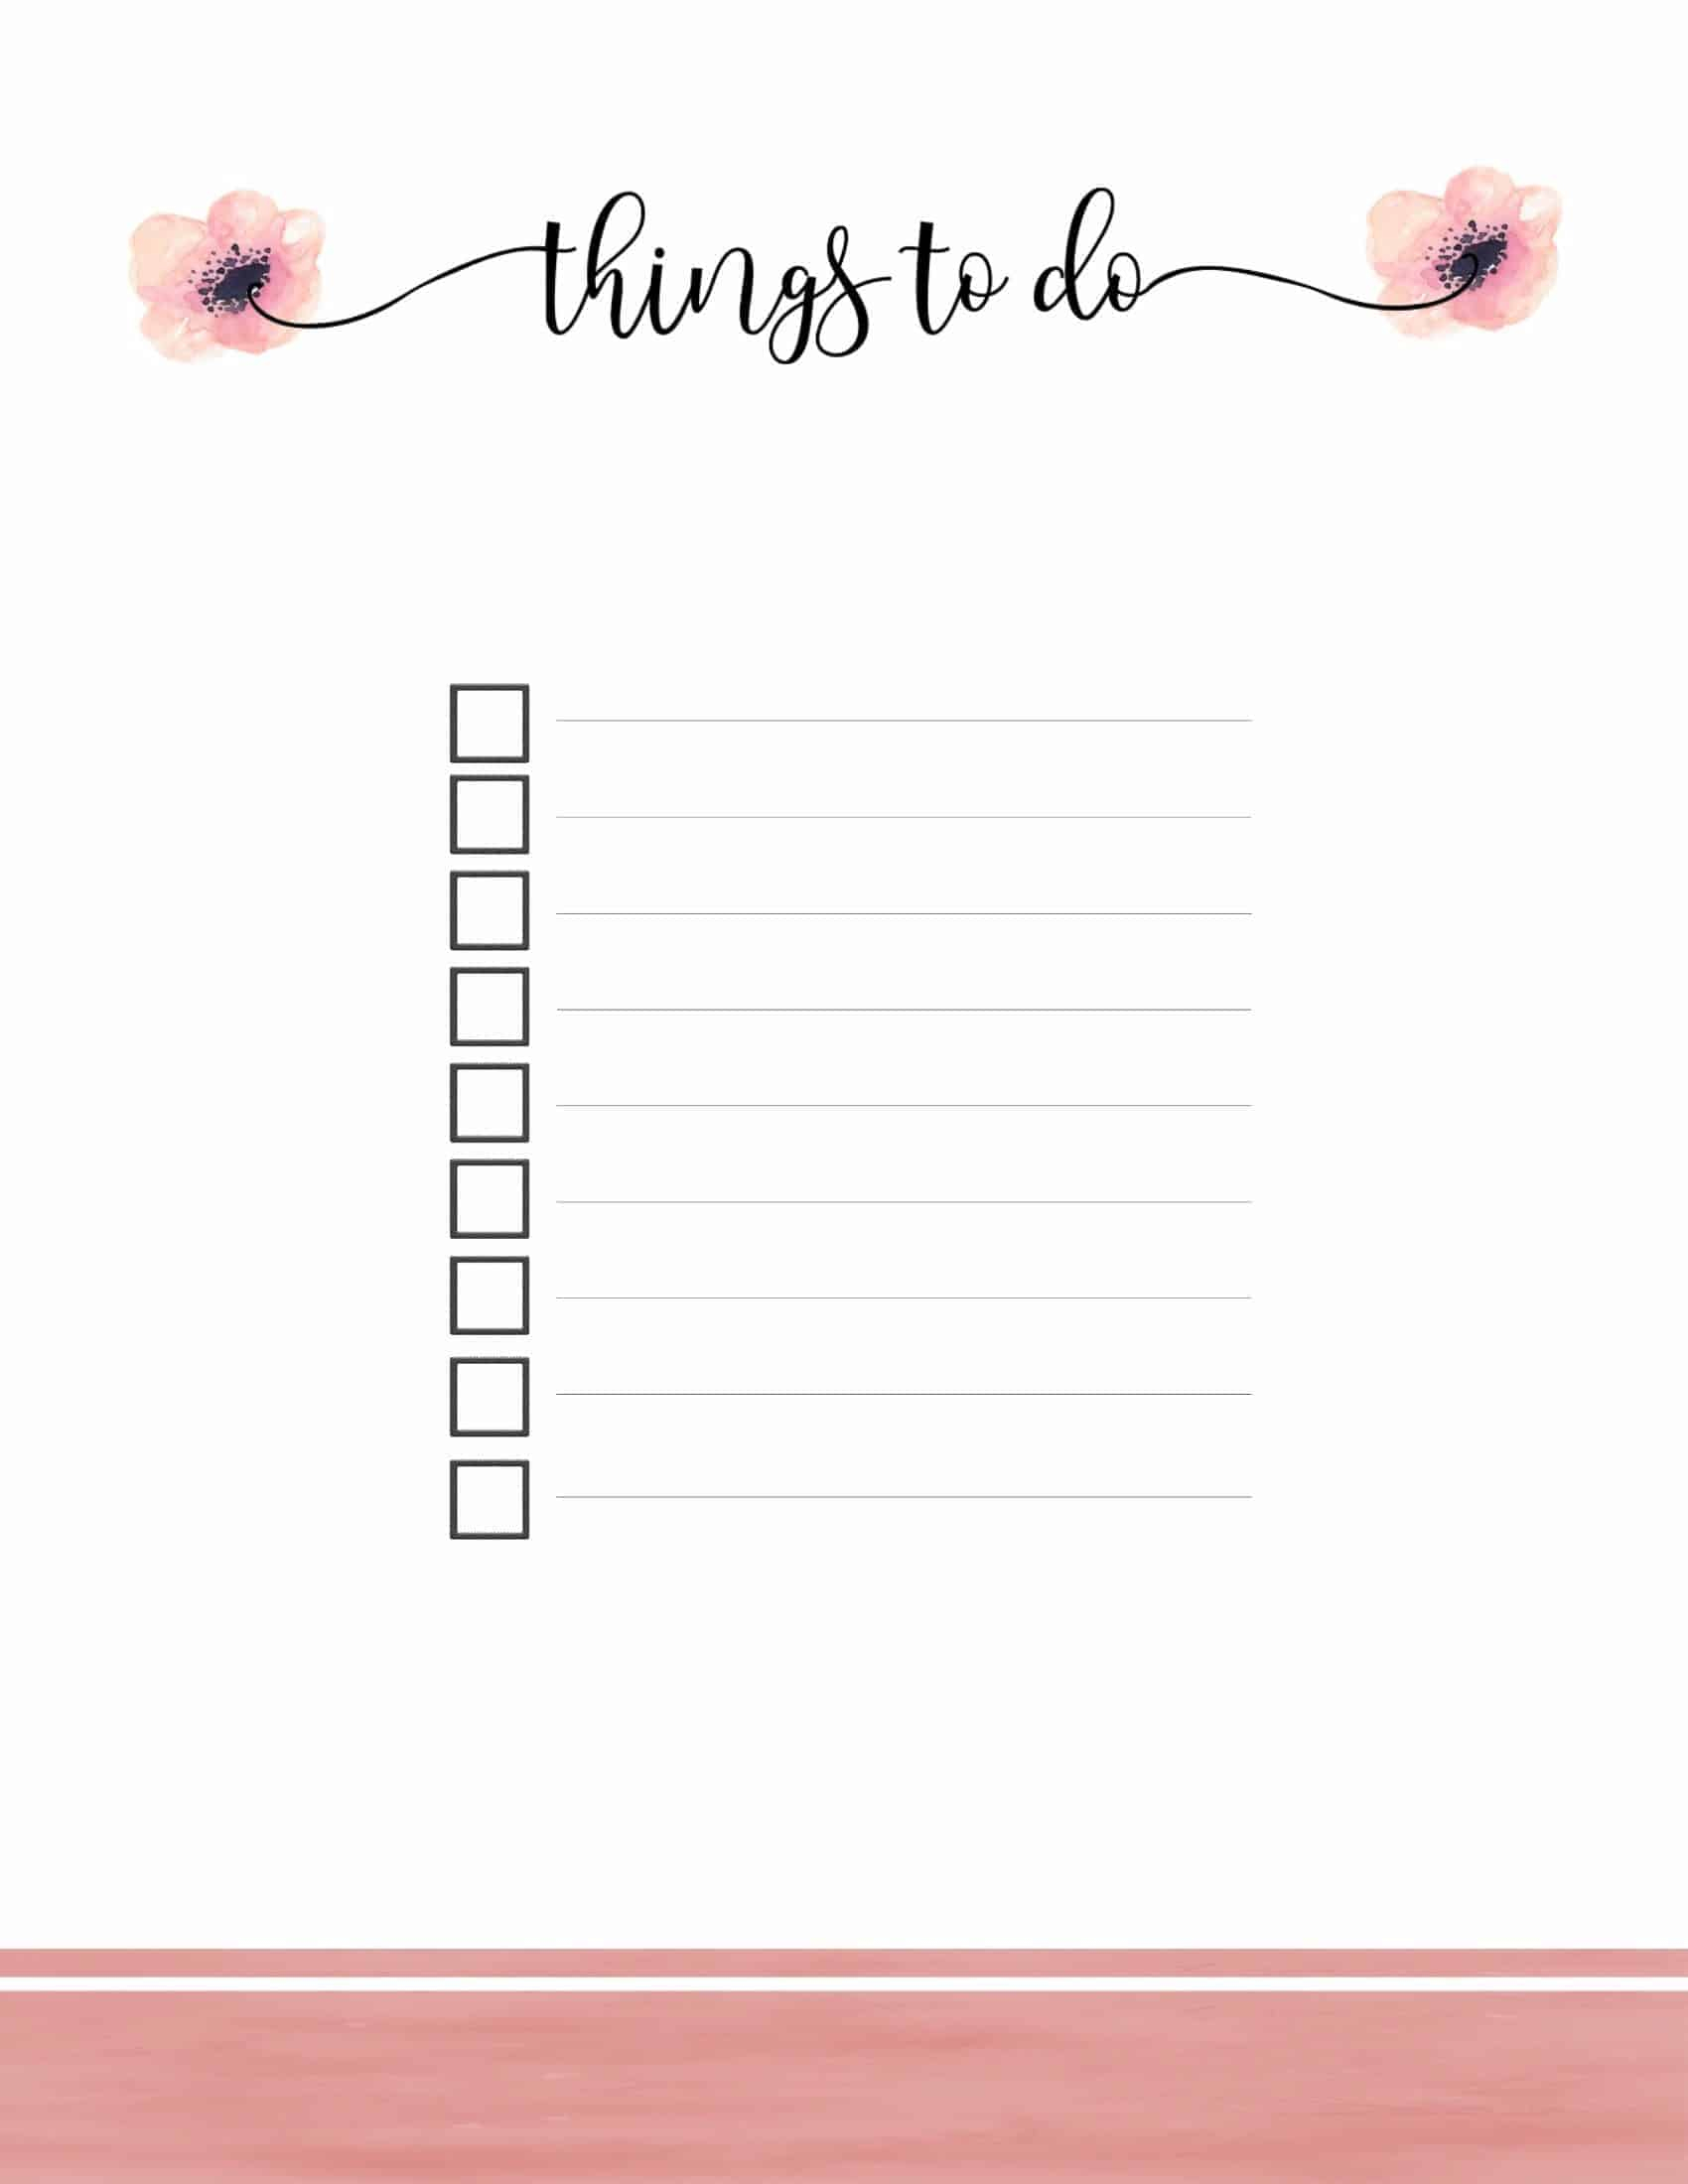 Free Printable To Do List | Print Or Use Online | Access From Anywhere serapportantà To Do List À Imprimer